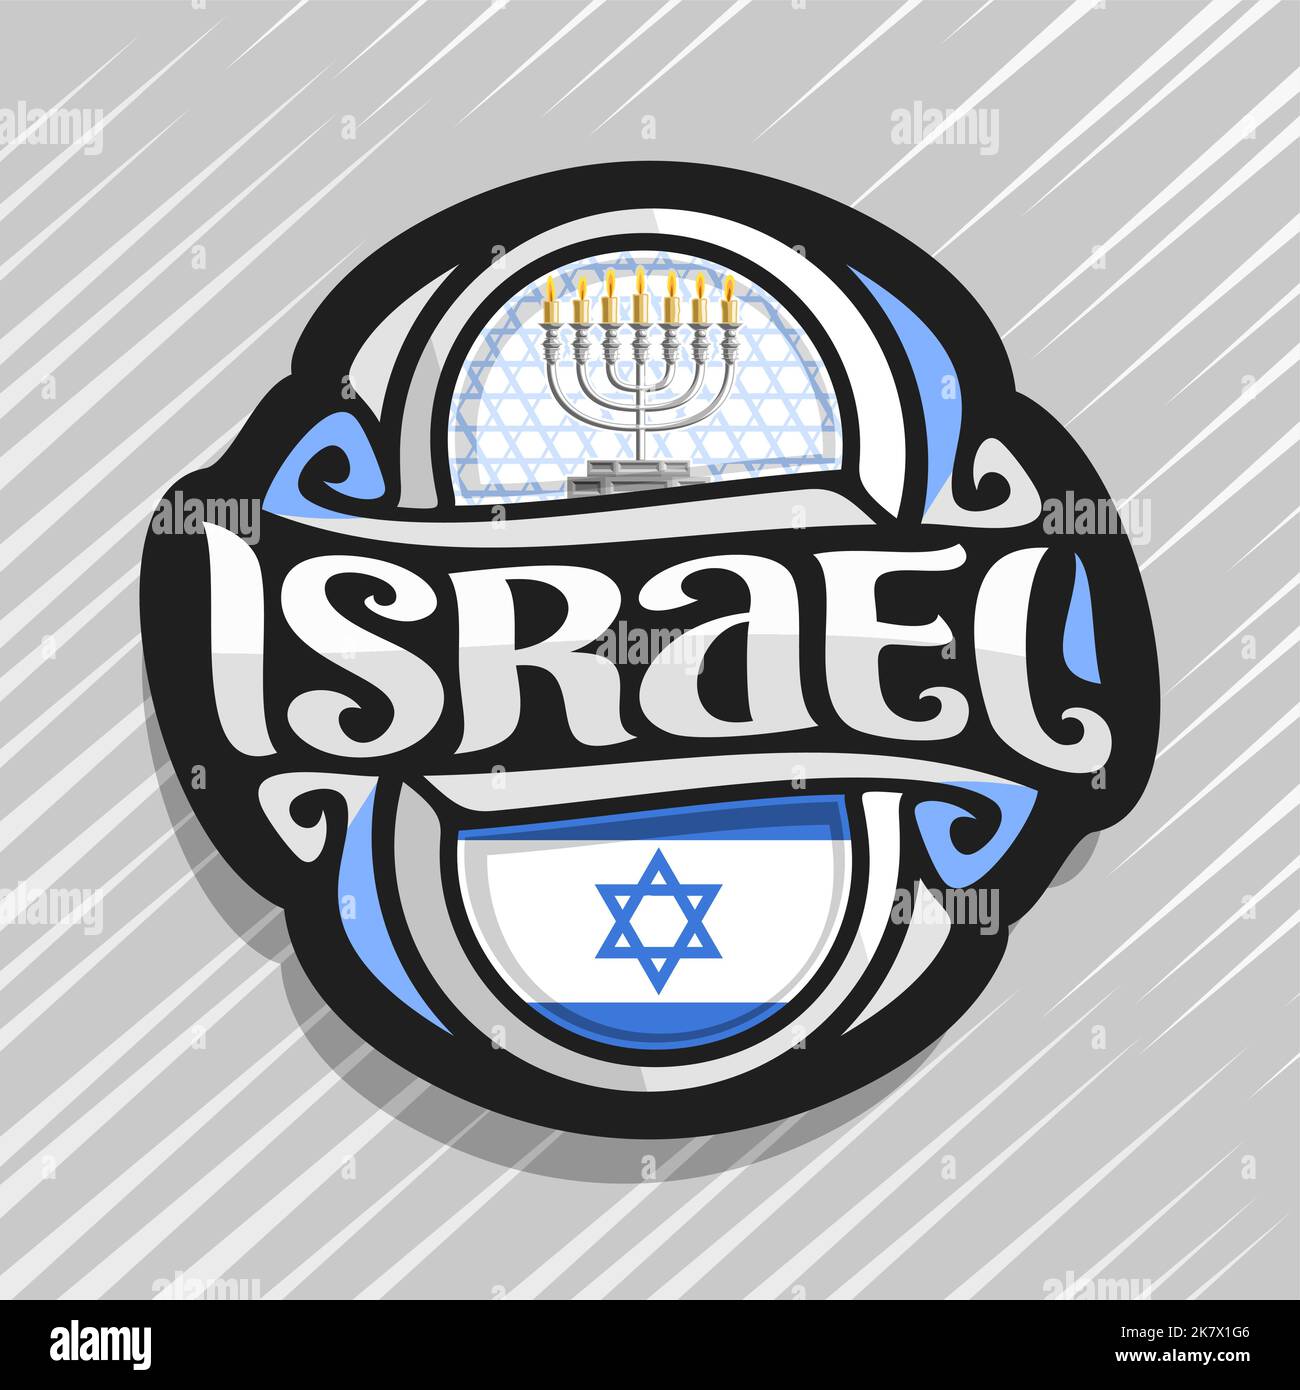 Vector logo for Israel country, fridge magnet with israeli state flag, original brush typeface for word israel and national jewish symbol - menorah wi Stock Vector